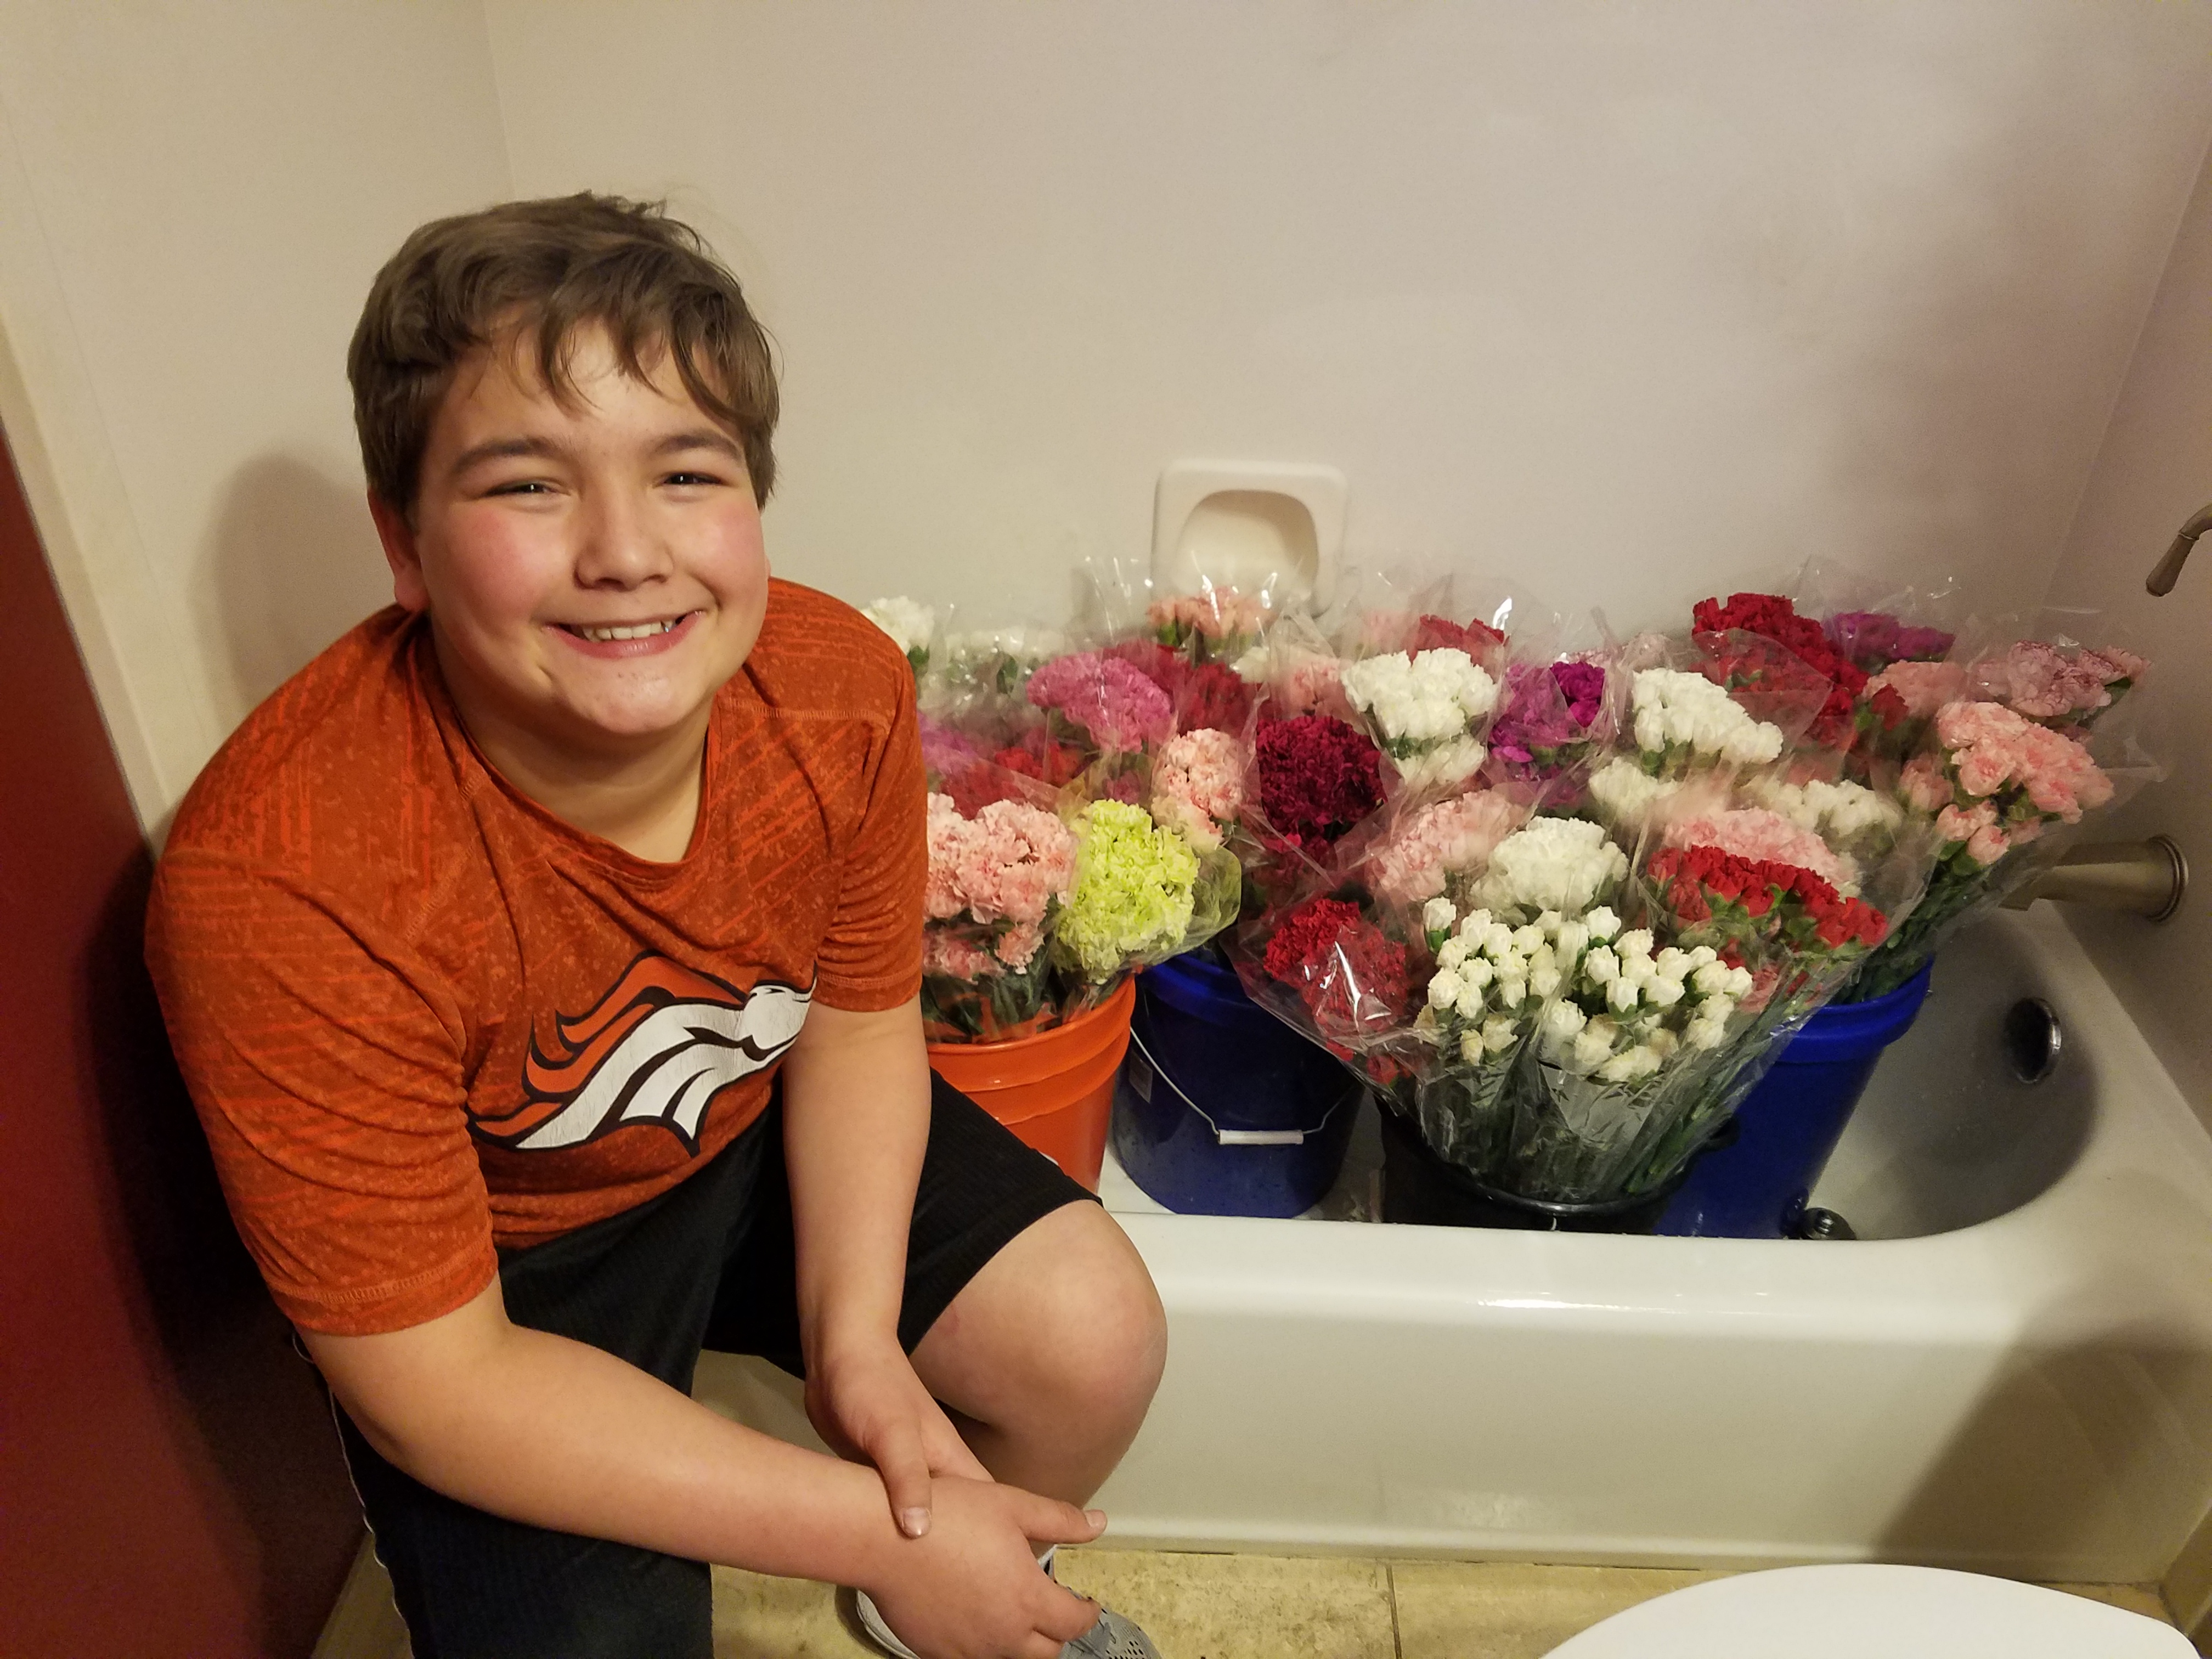 Meet the inspiring eighth-grader who bought 947 carnations for 947 young ladies